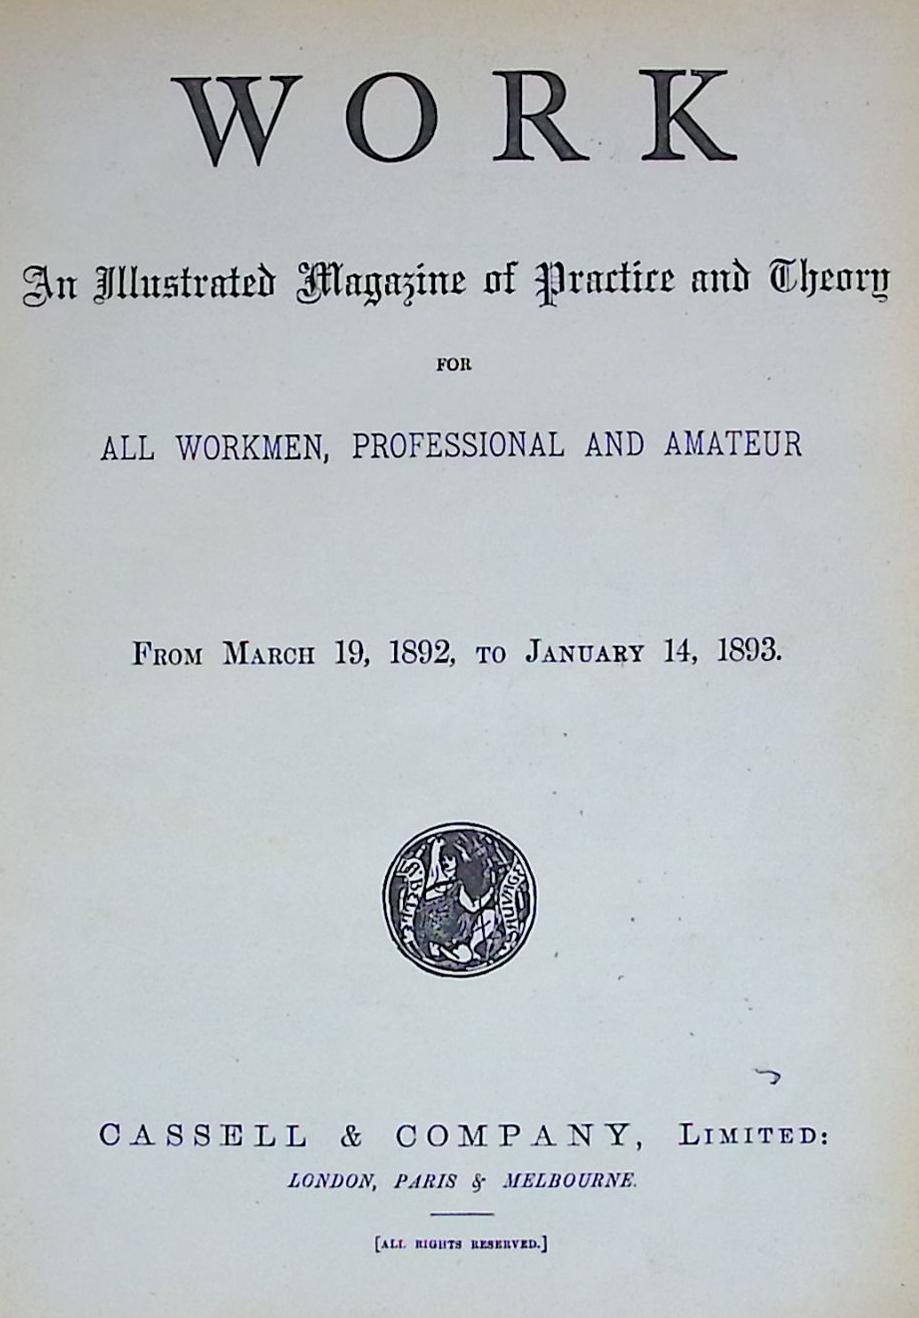 Work. An Illustrated Magazine of Practice and Theory for All Workmen, Professional and Amateur. Volume VI. March to August 1892.